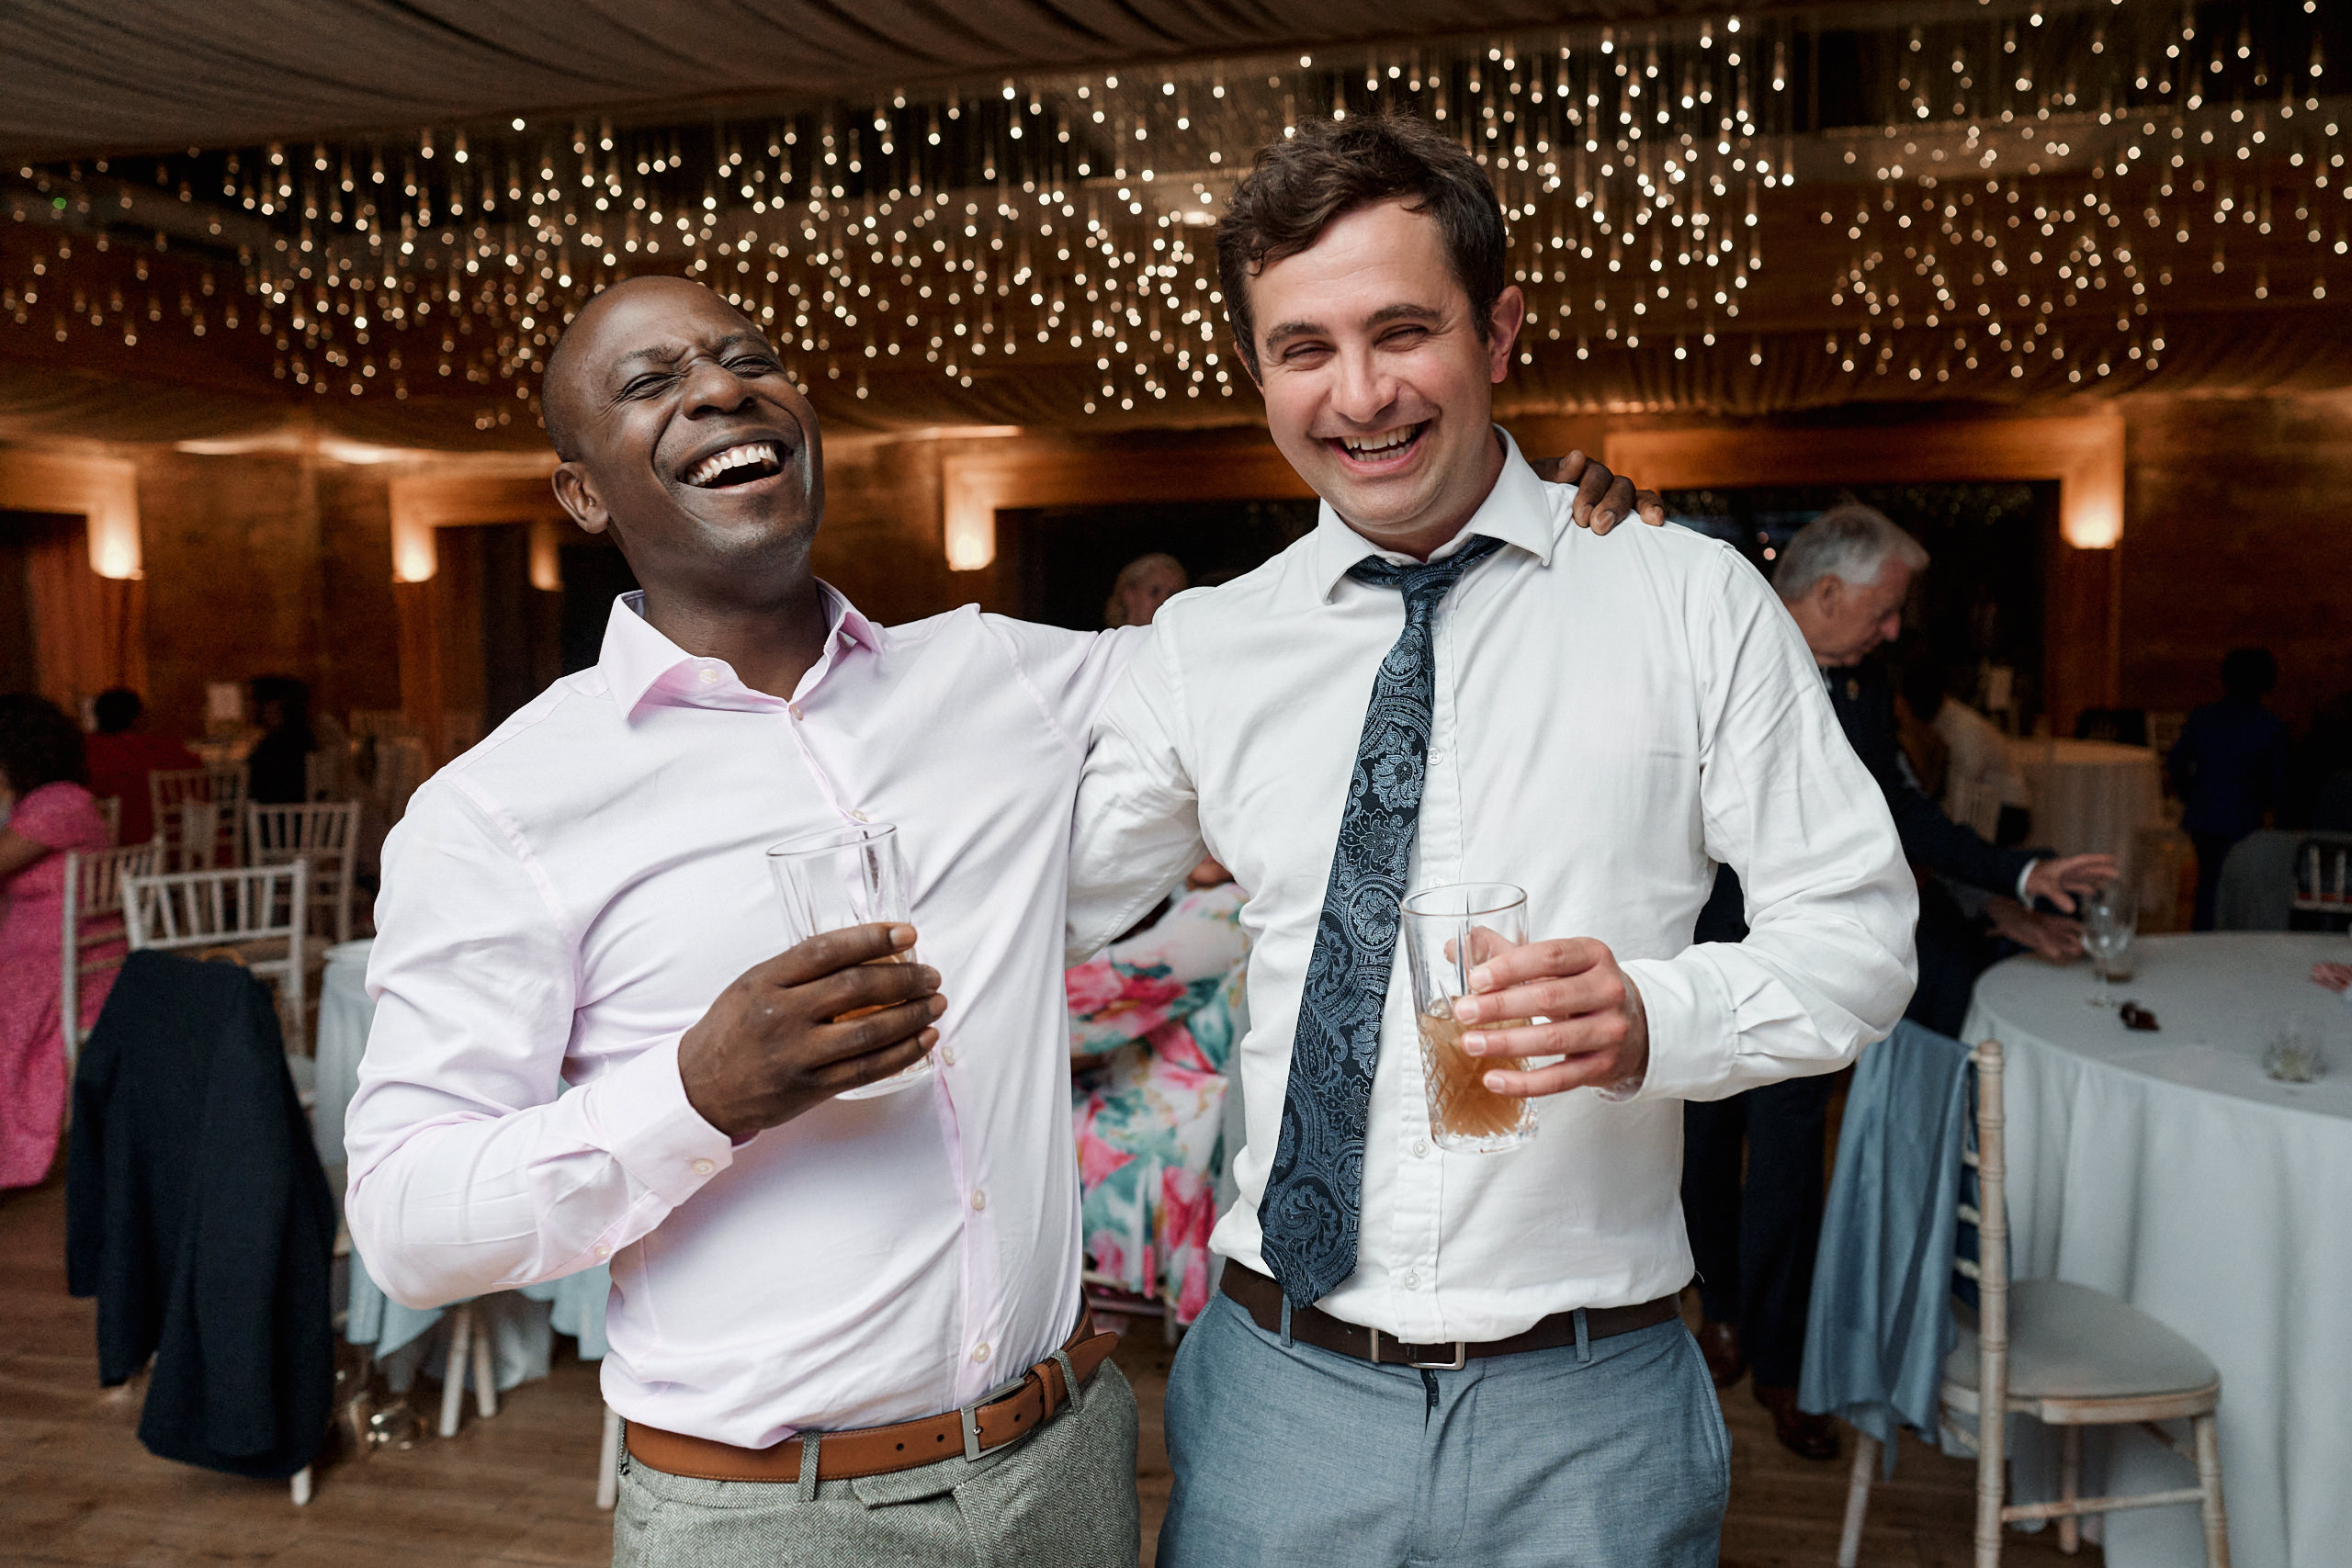 Two guys cracking up at a wedding party.